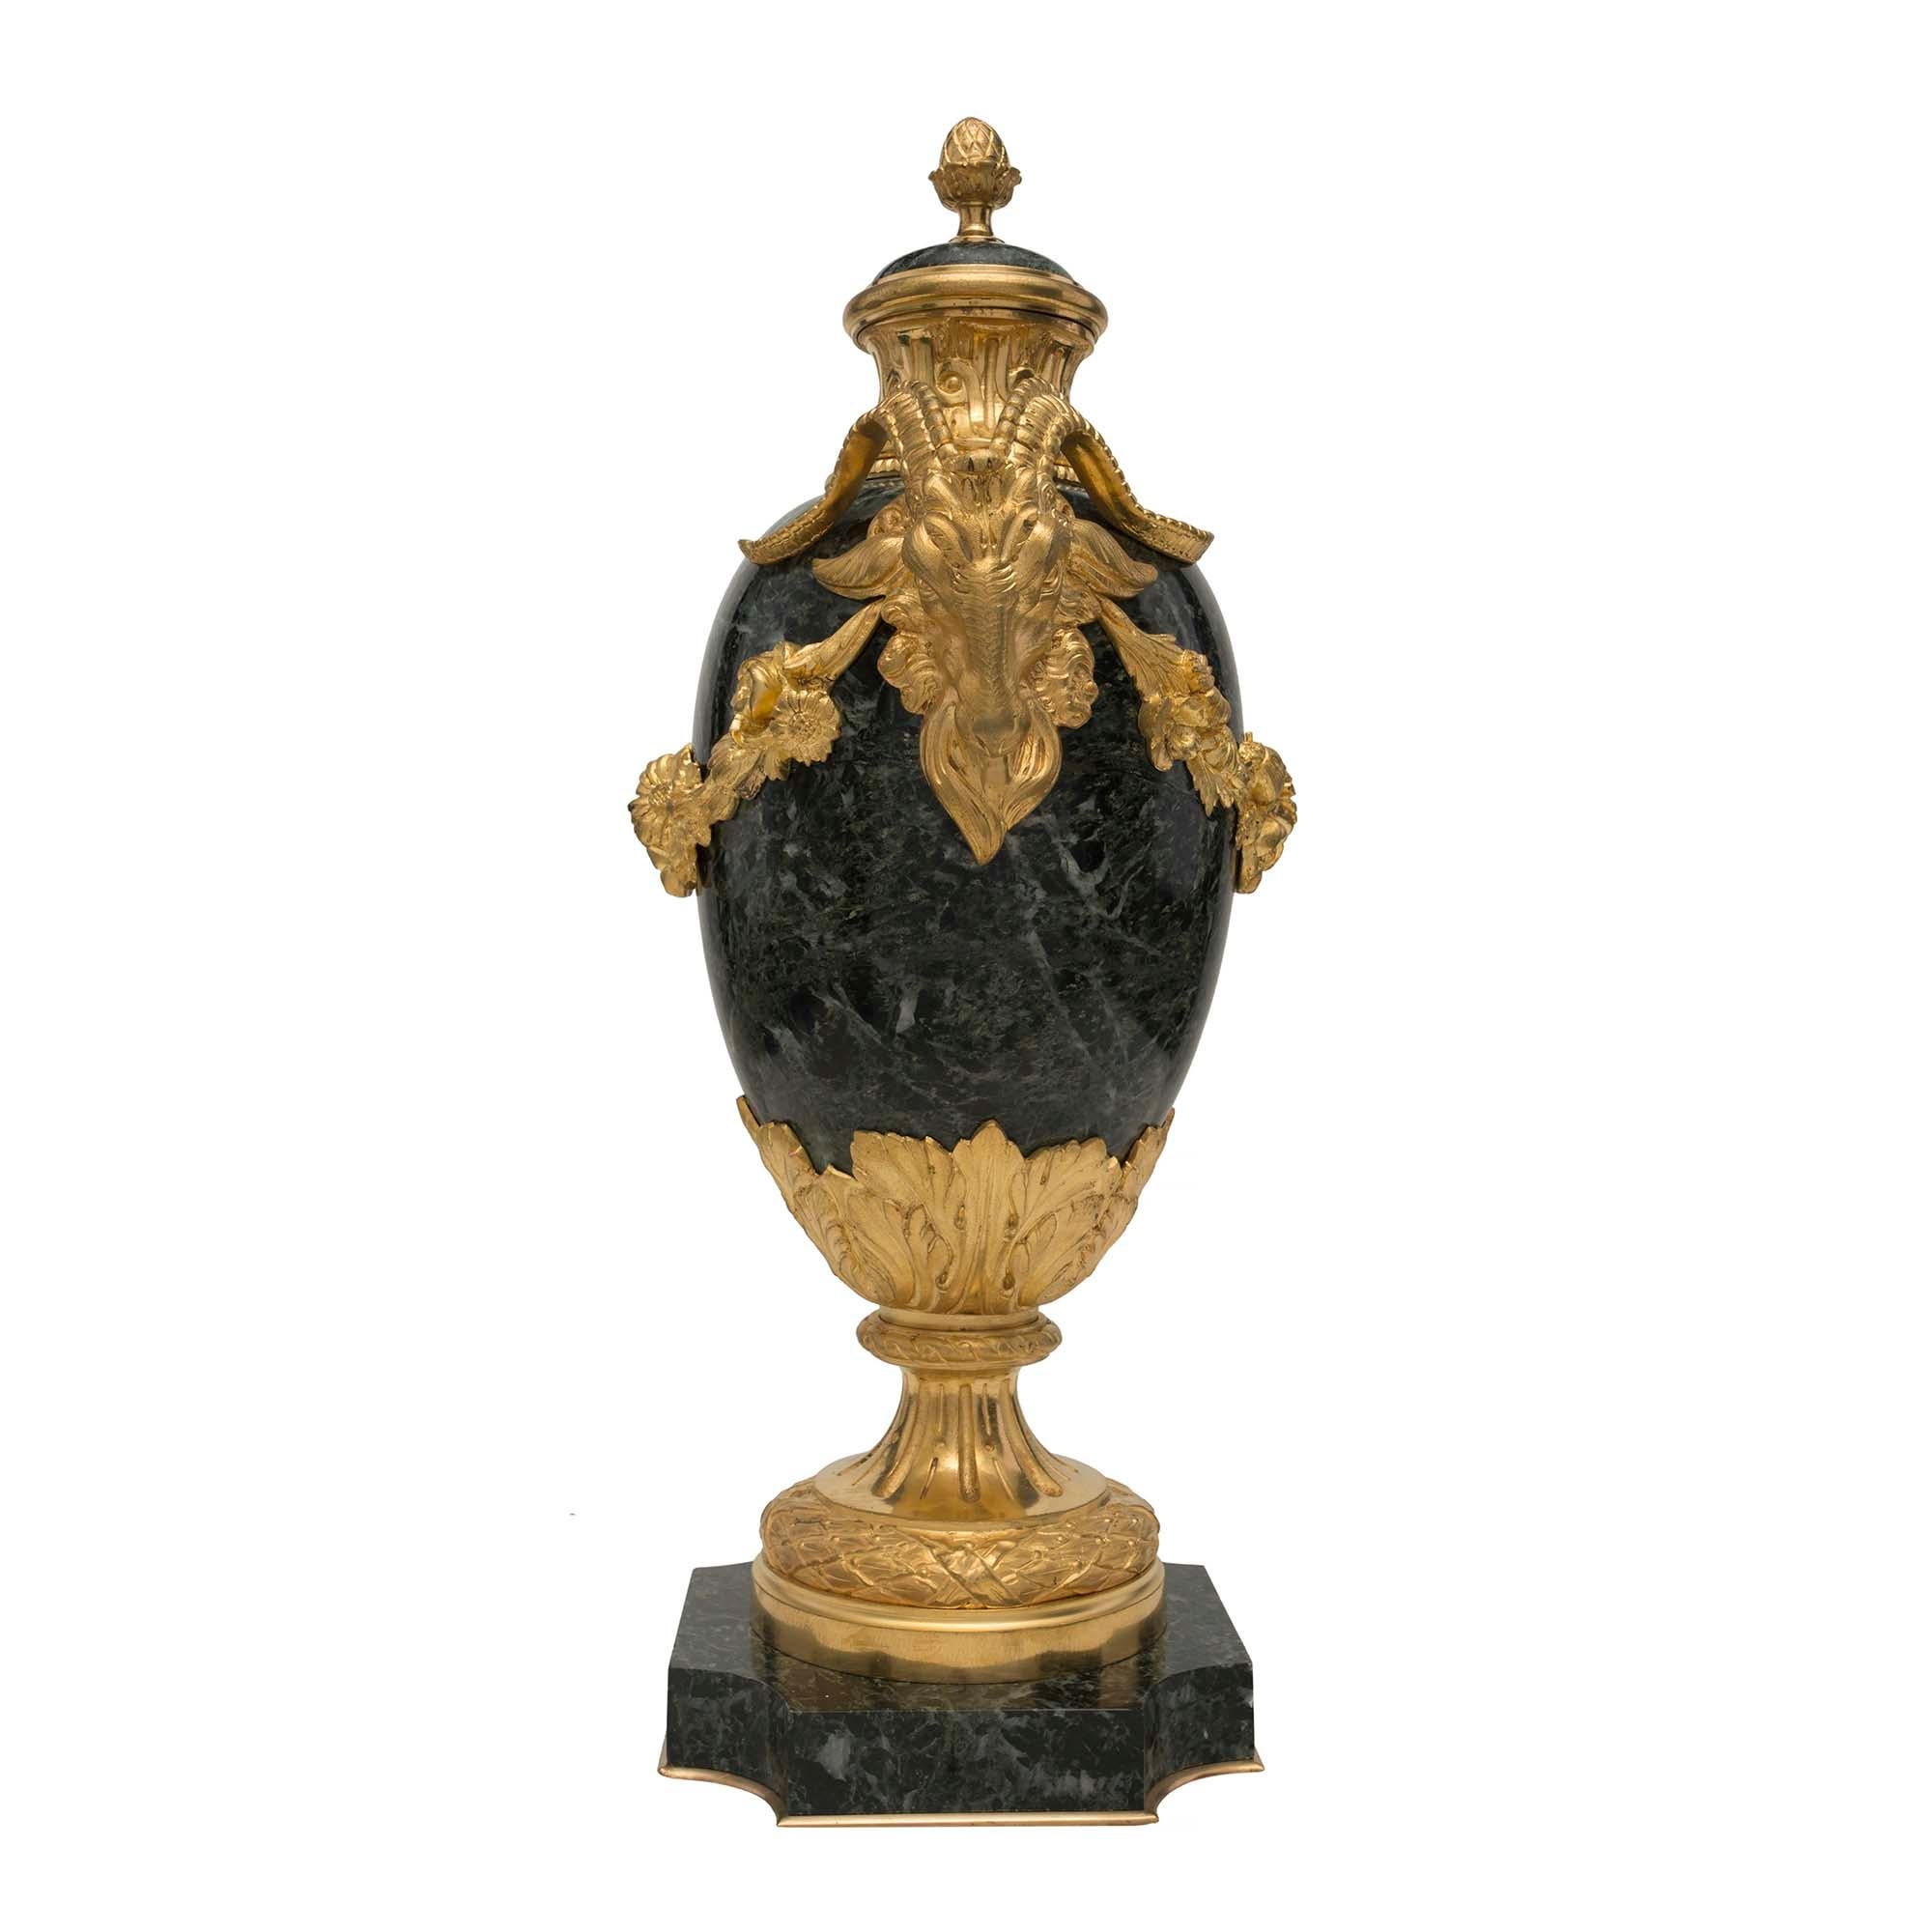 Ormolu Pair of French 19th Century Louis XVI Style Vert Antique Lidded Marble Urns For Sale